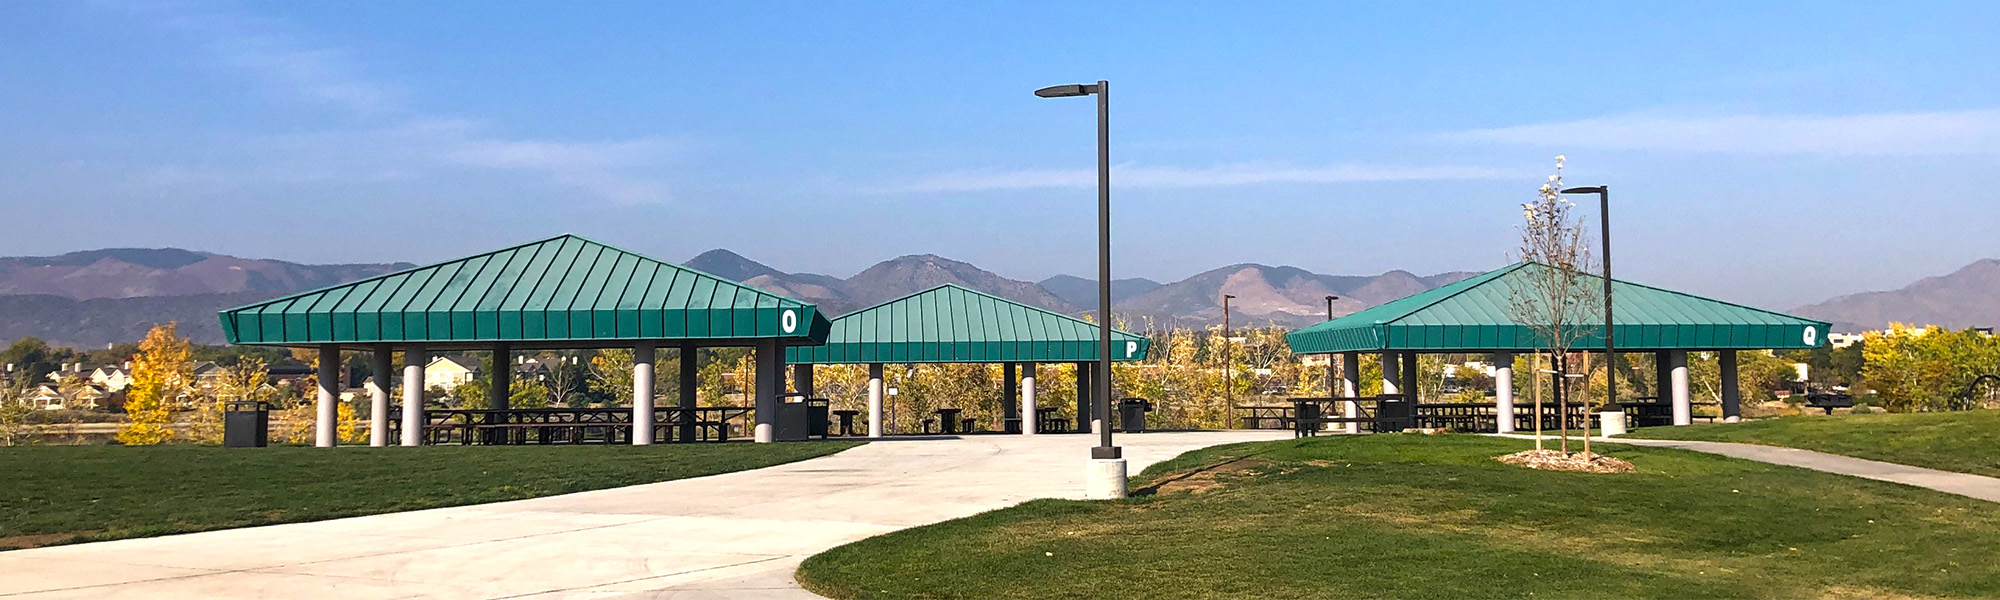 Scenic image of Shelters O, P and Q in Clement Park with mountains in background.